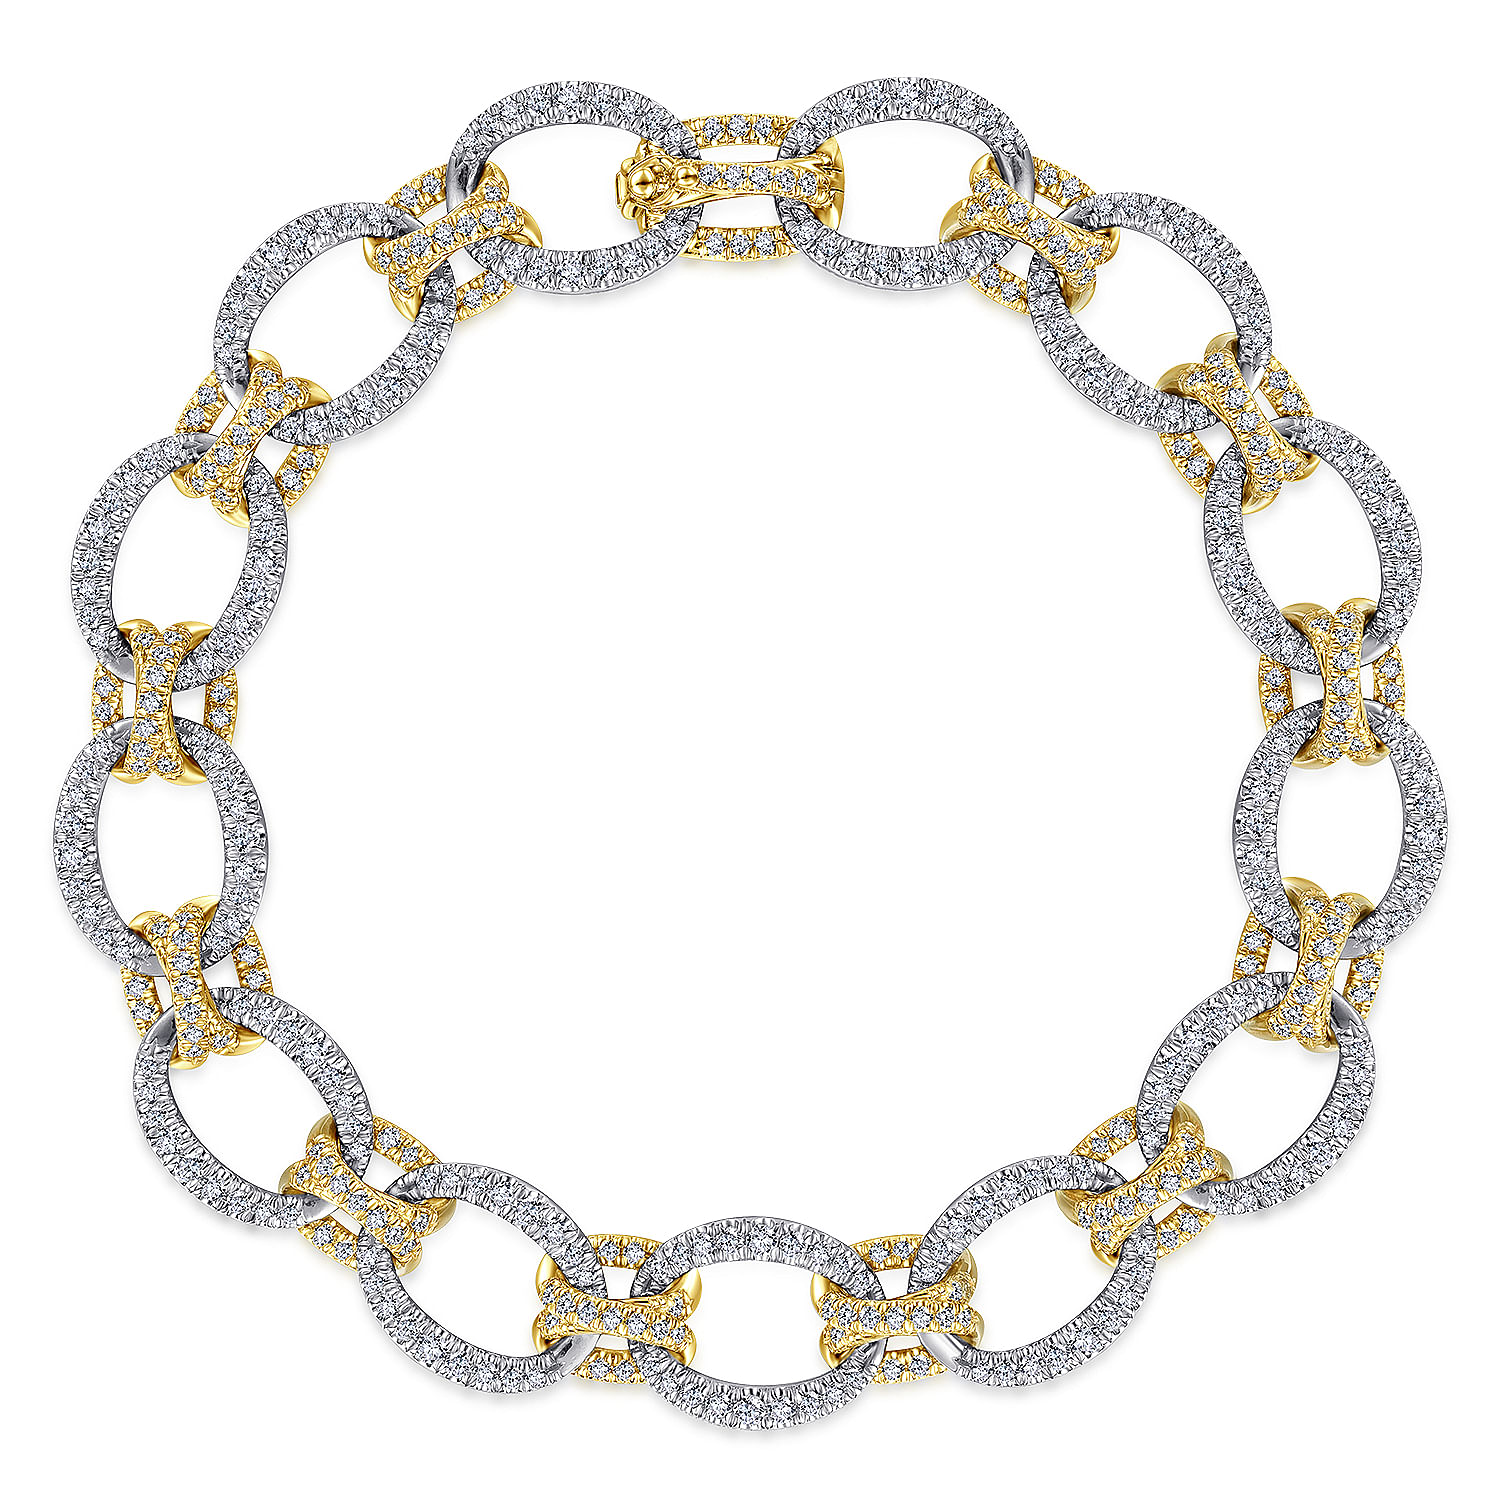 14K Yellow and White Gold Bracelet with Alternating Links and Pavé Diamonds